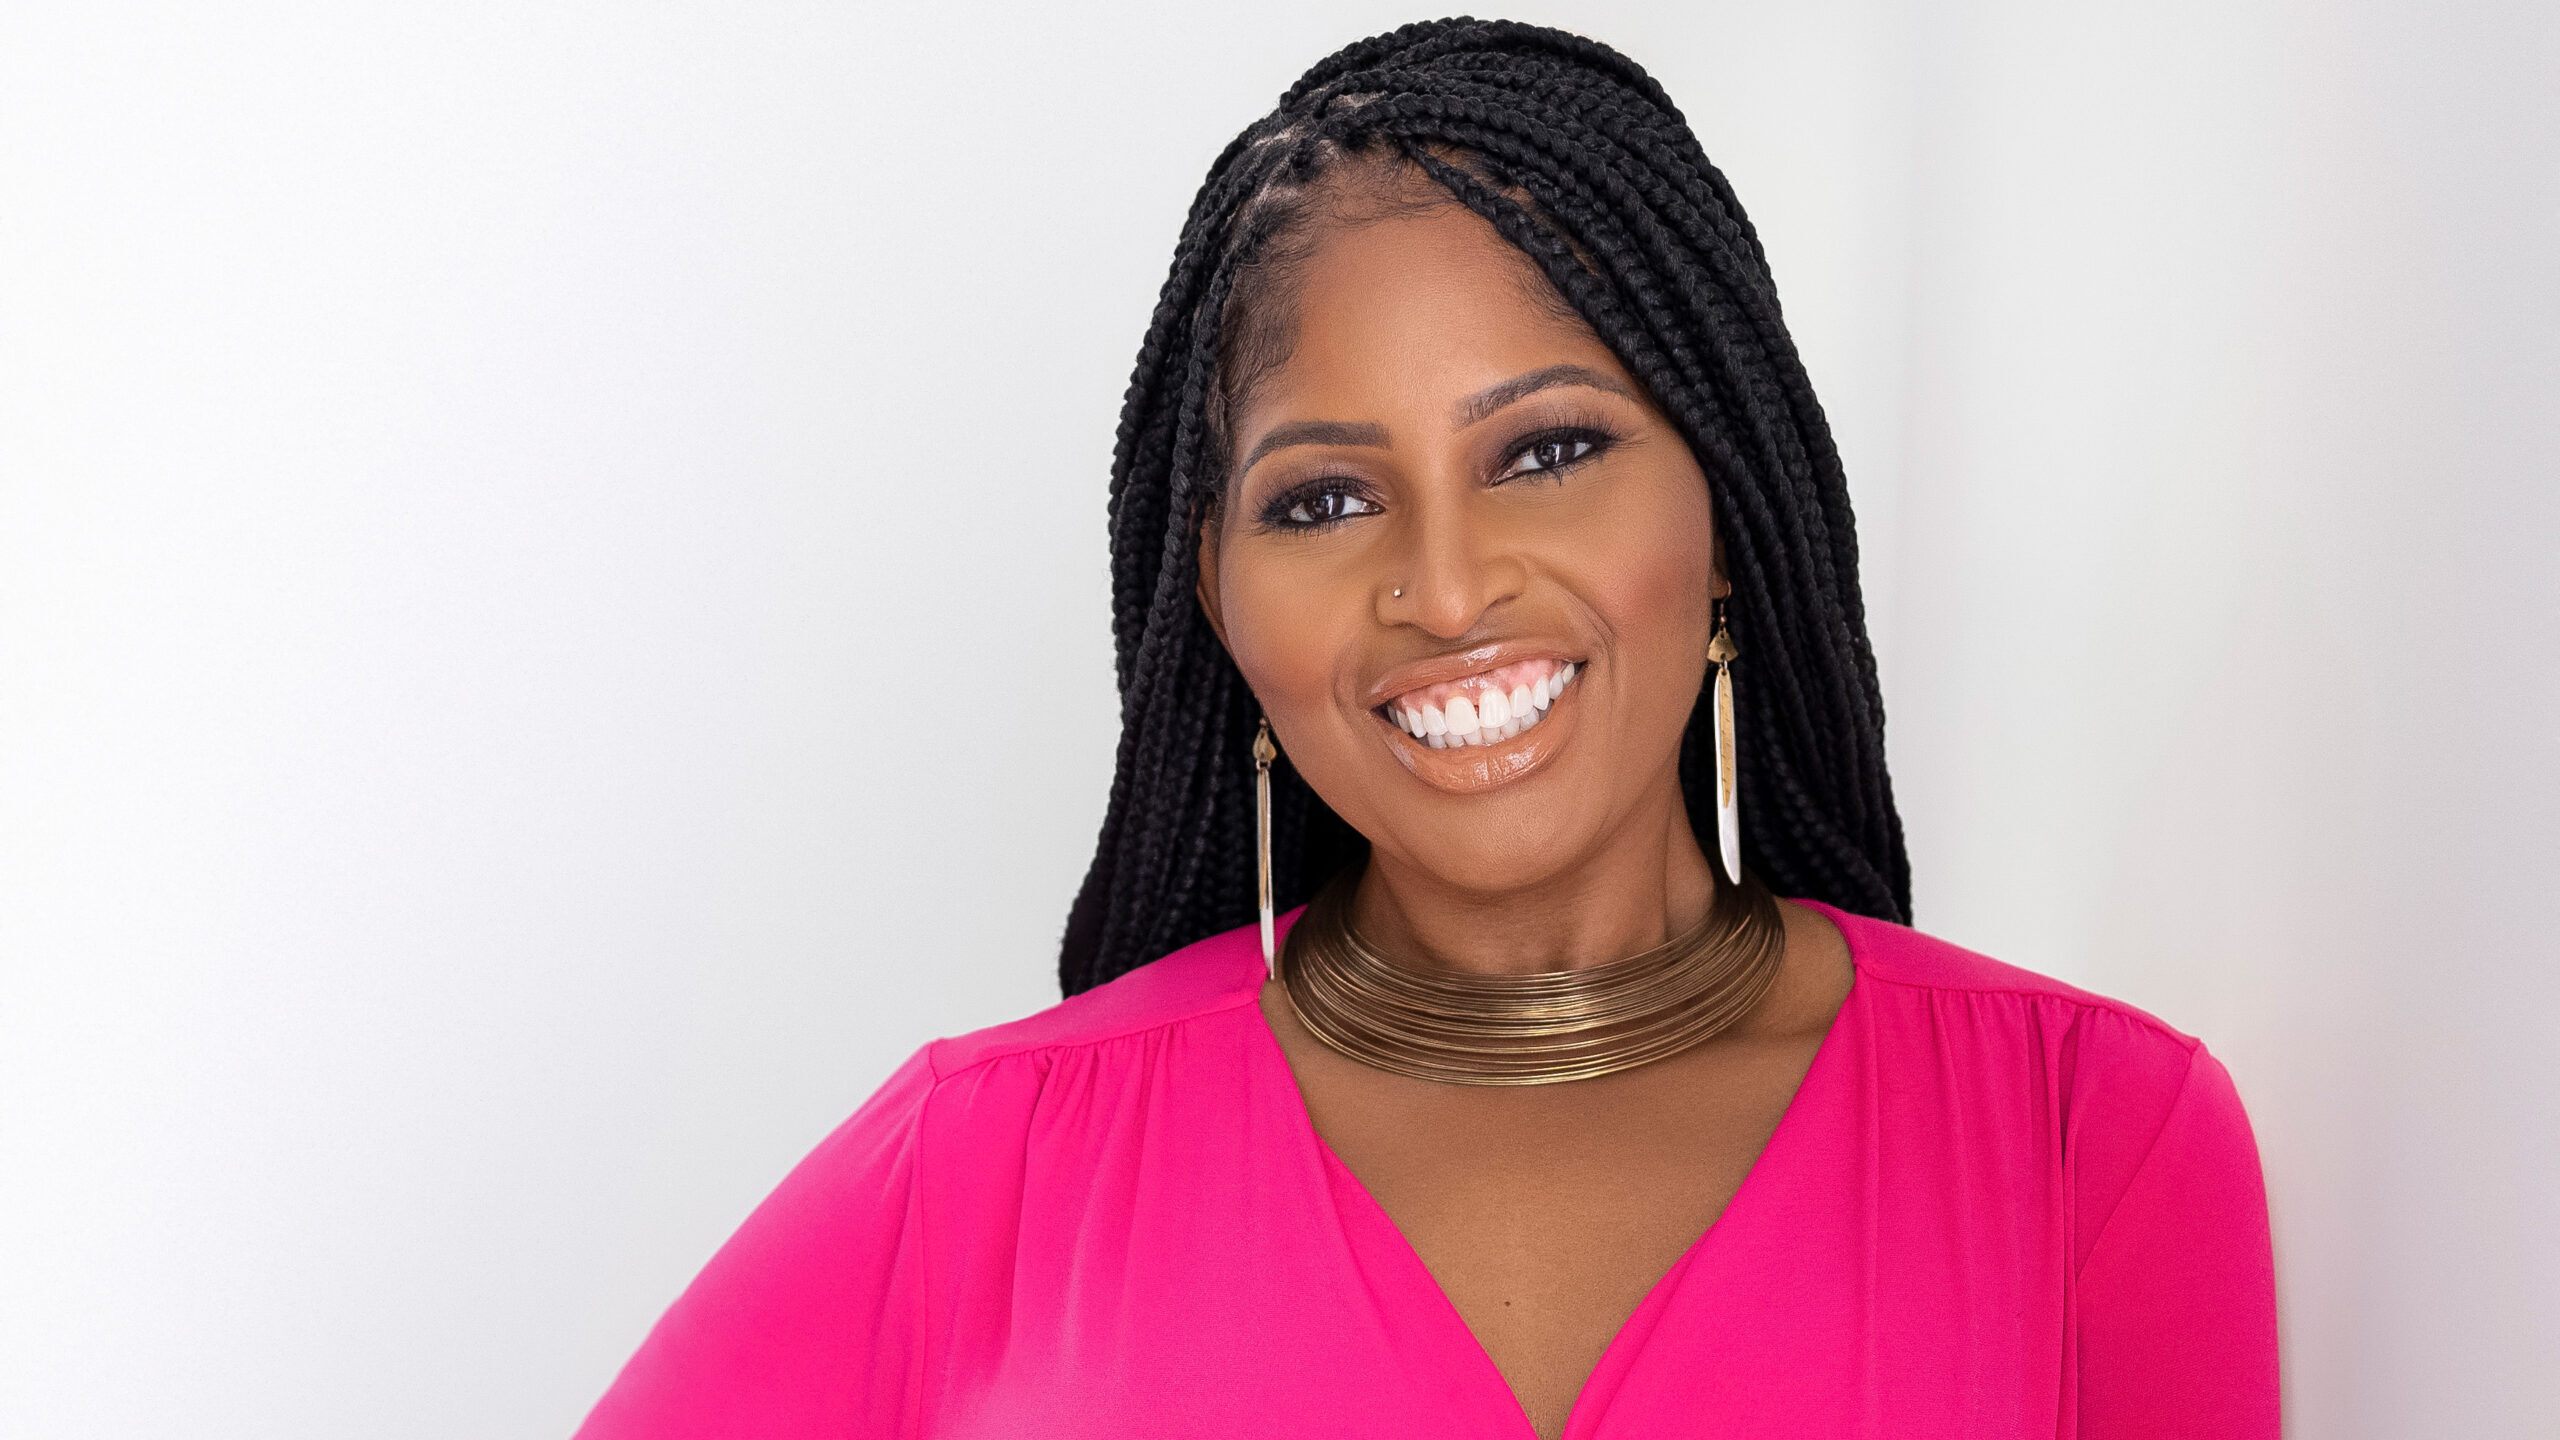 A woman with dark braids smiles in front of a white background.